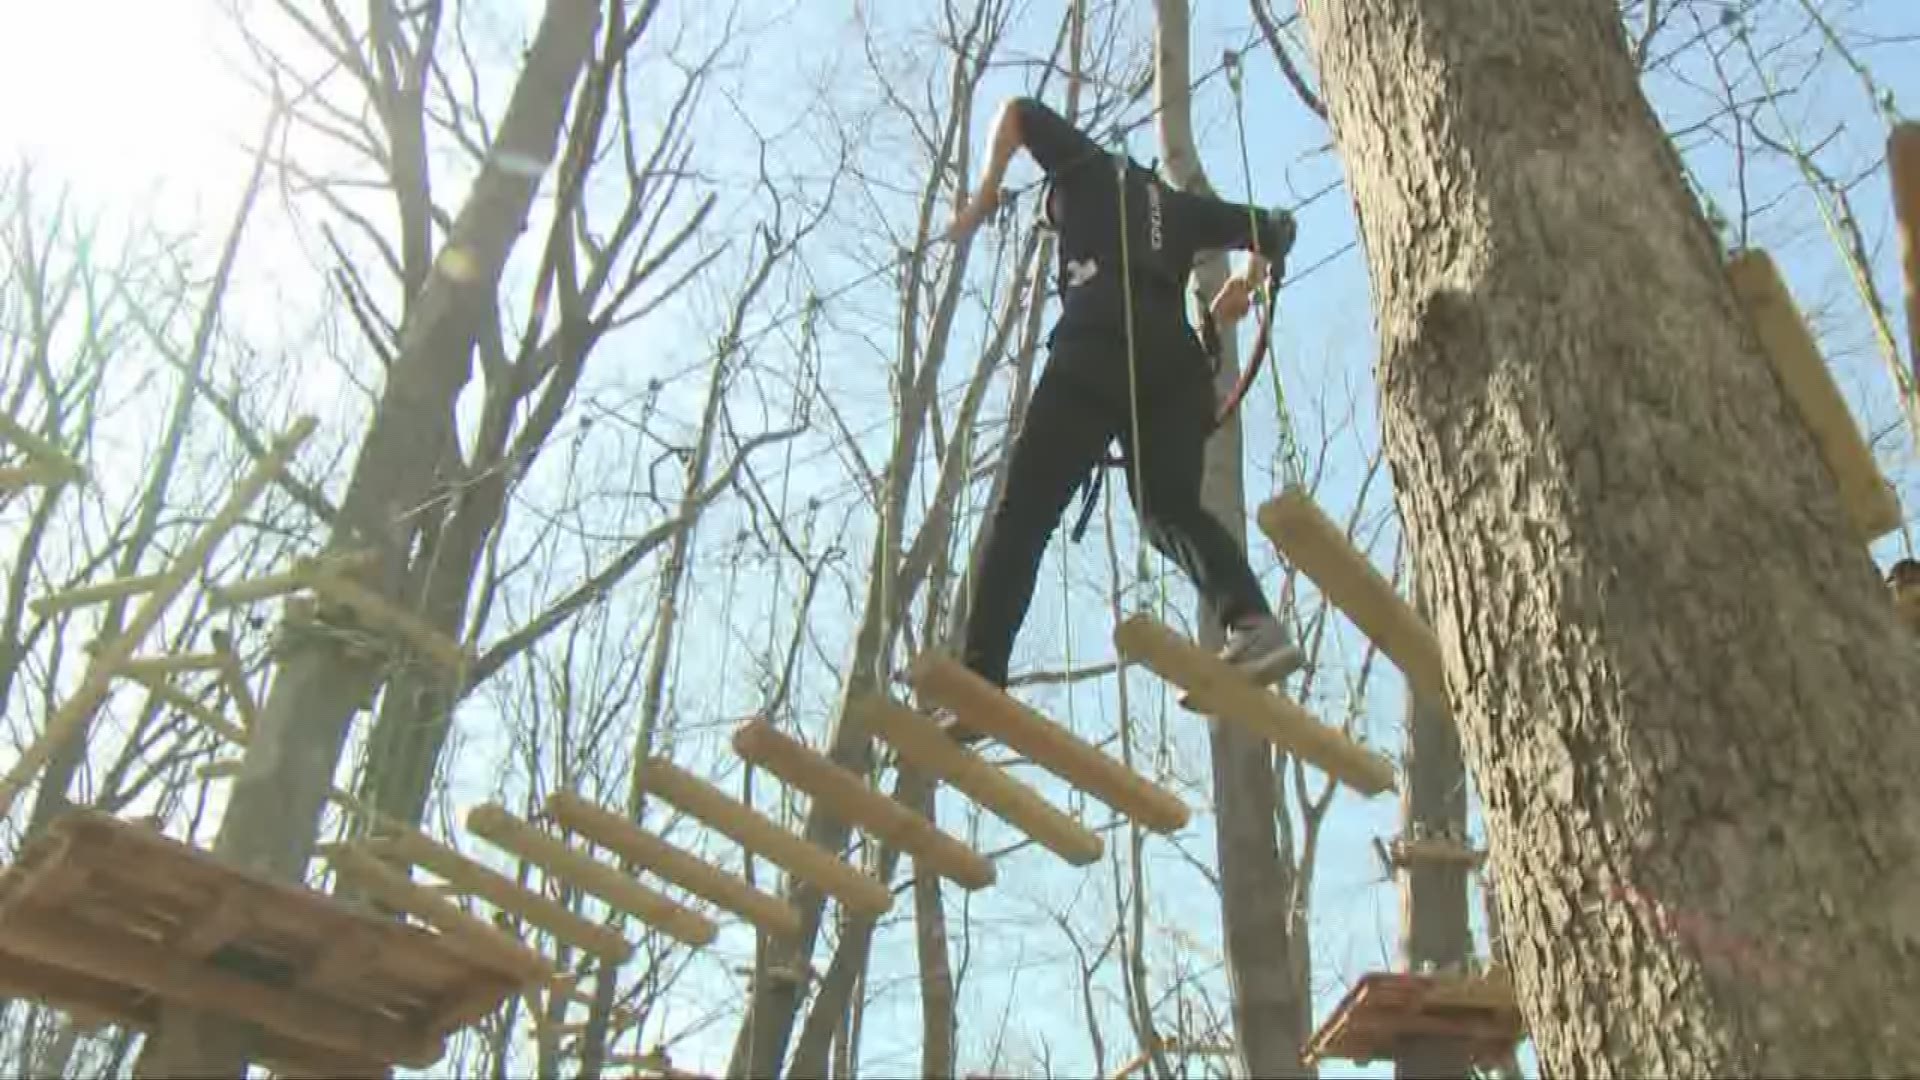 May 4, 2018: WKYC's Austin Love had some fun this week checking out the all-new Lake Erie Canopy Tours at Geneva-on-the-Lake.